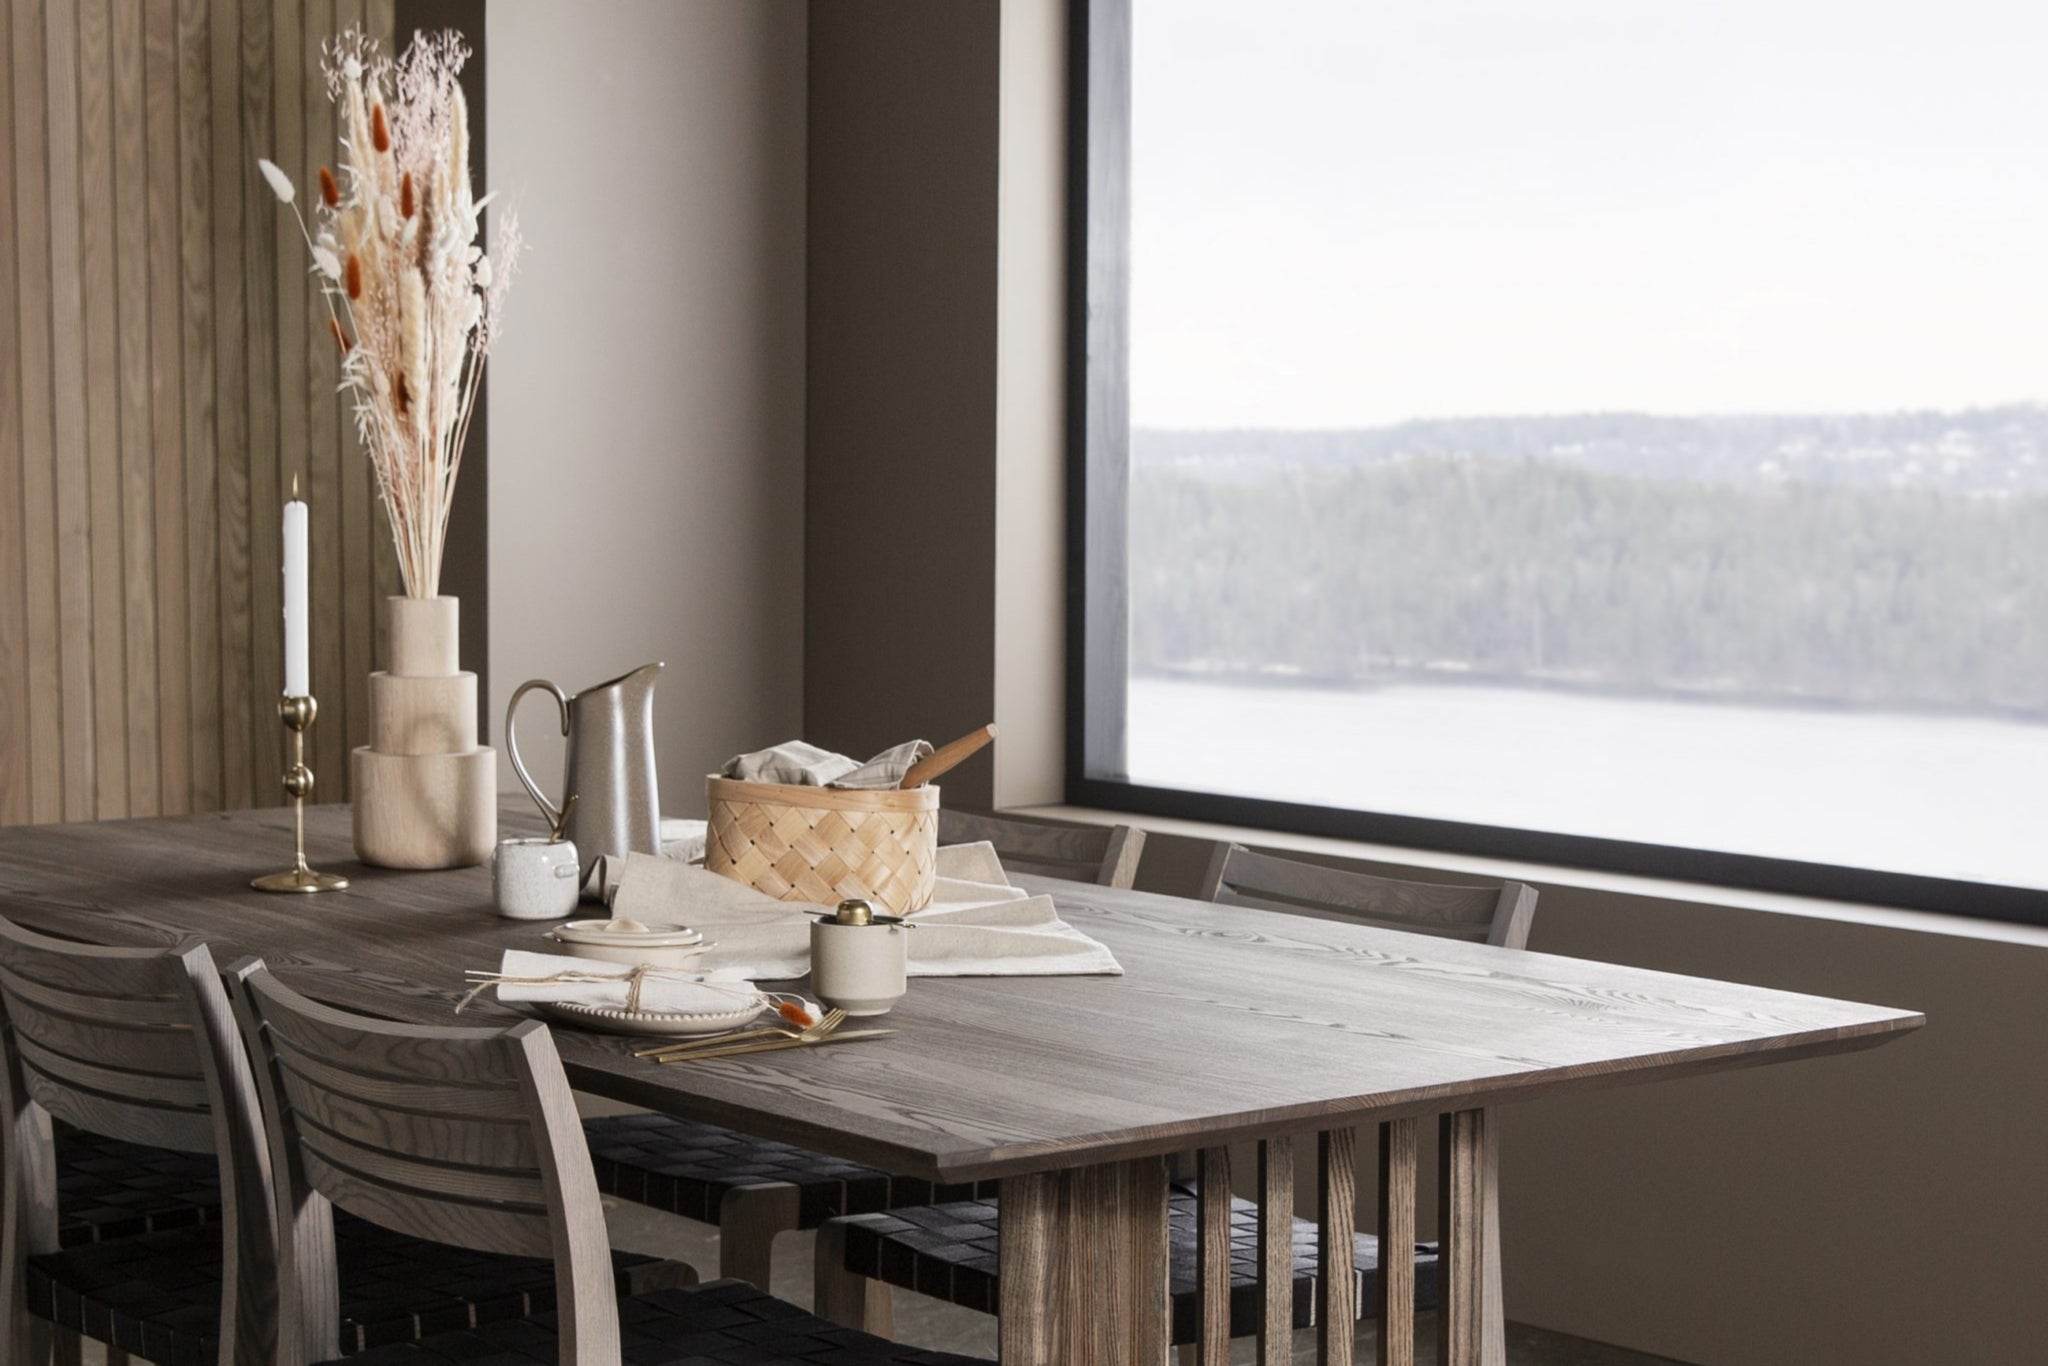 Custom wooden dining table in a grey wash with a forest view through the window